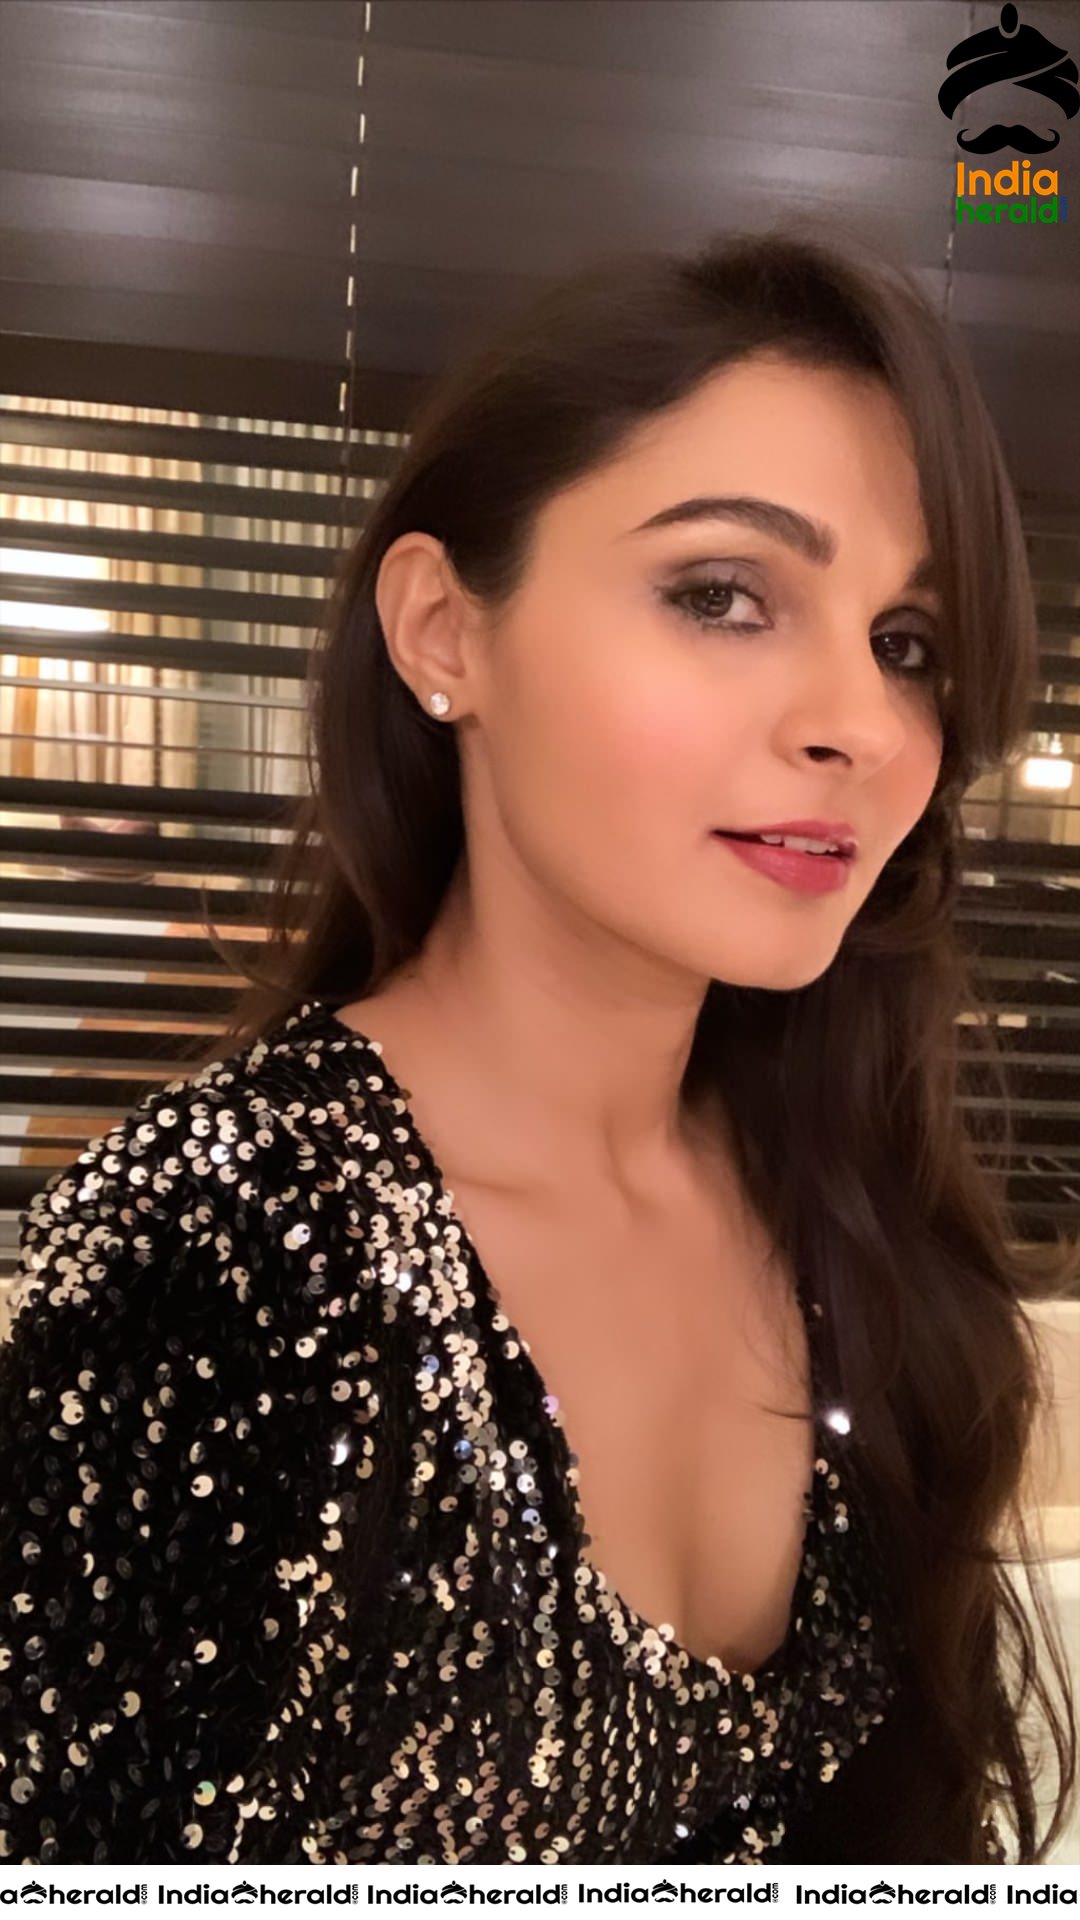 Andrea Jeremiah Hot Selfies Before the Show